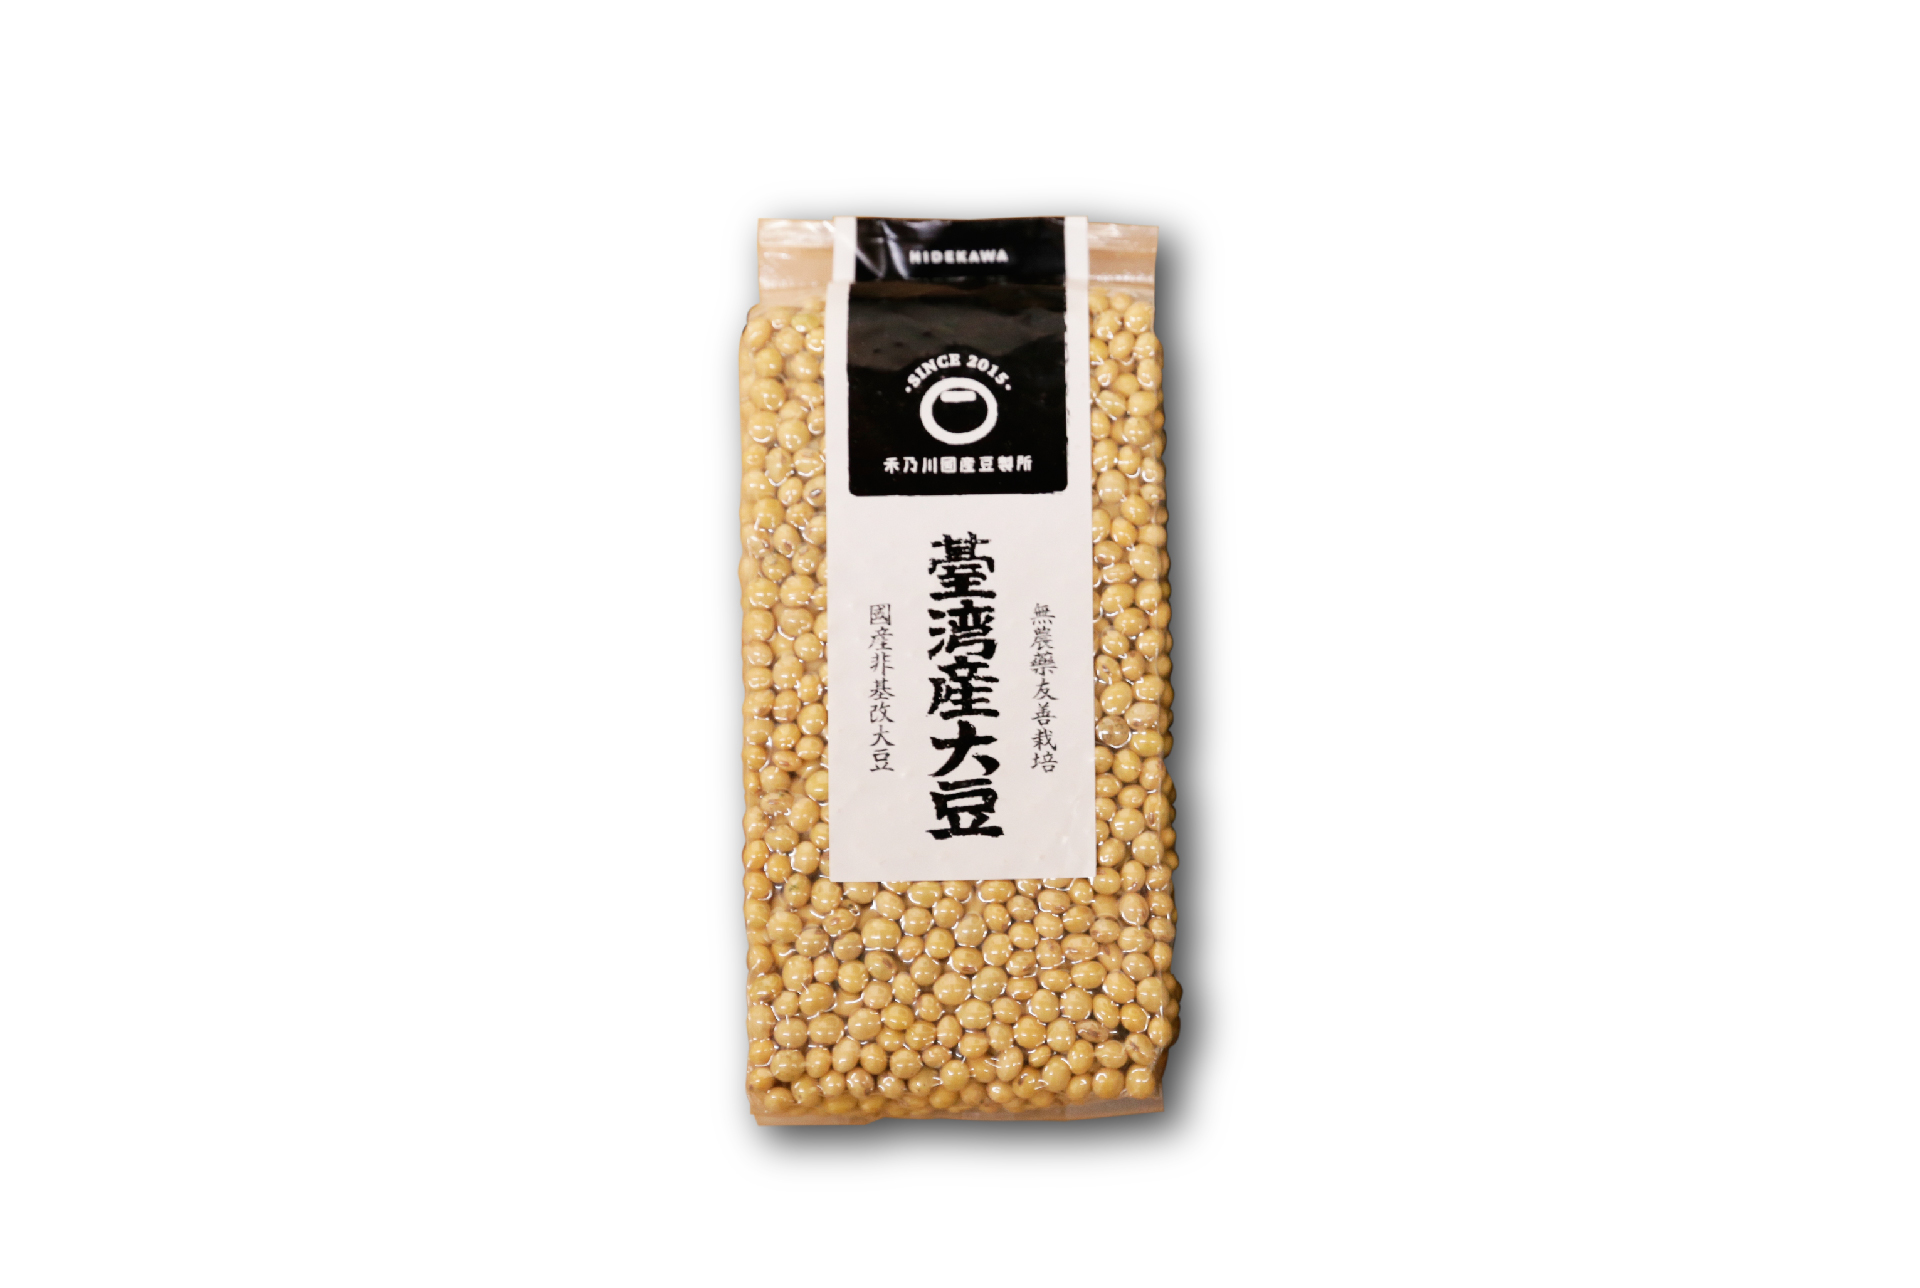 Taiwan domestic non-GMO and pesticide-free soybeans cultivated by local farmers | Taiwan domestic non-GMO soy milk shop | HIDEKAWA